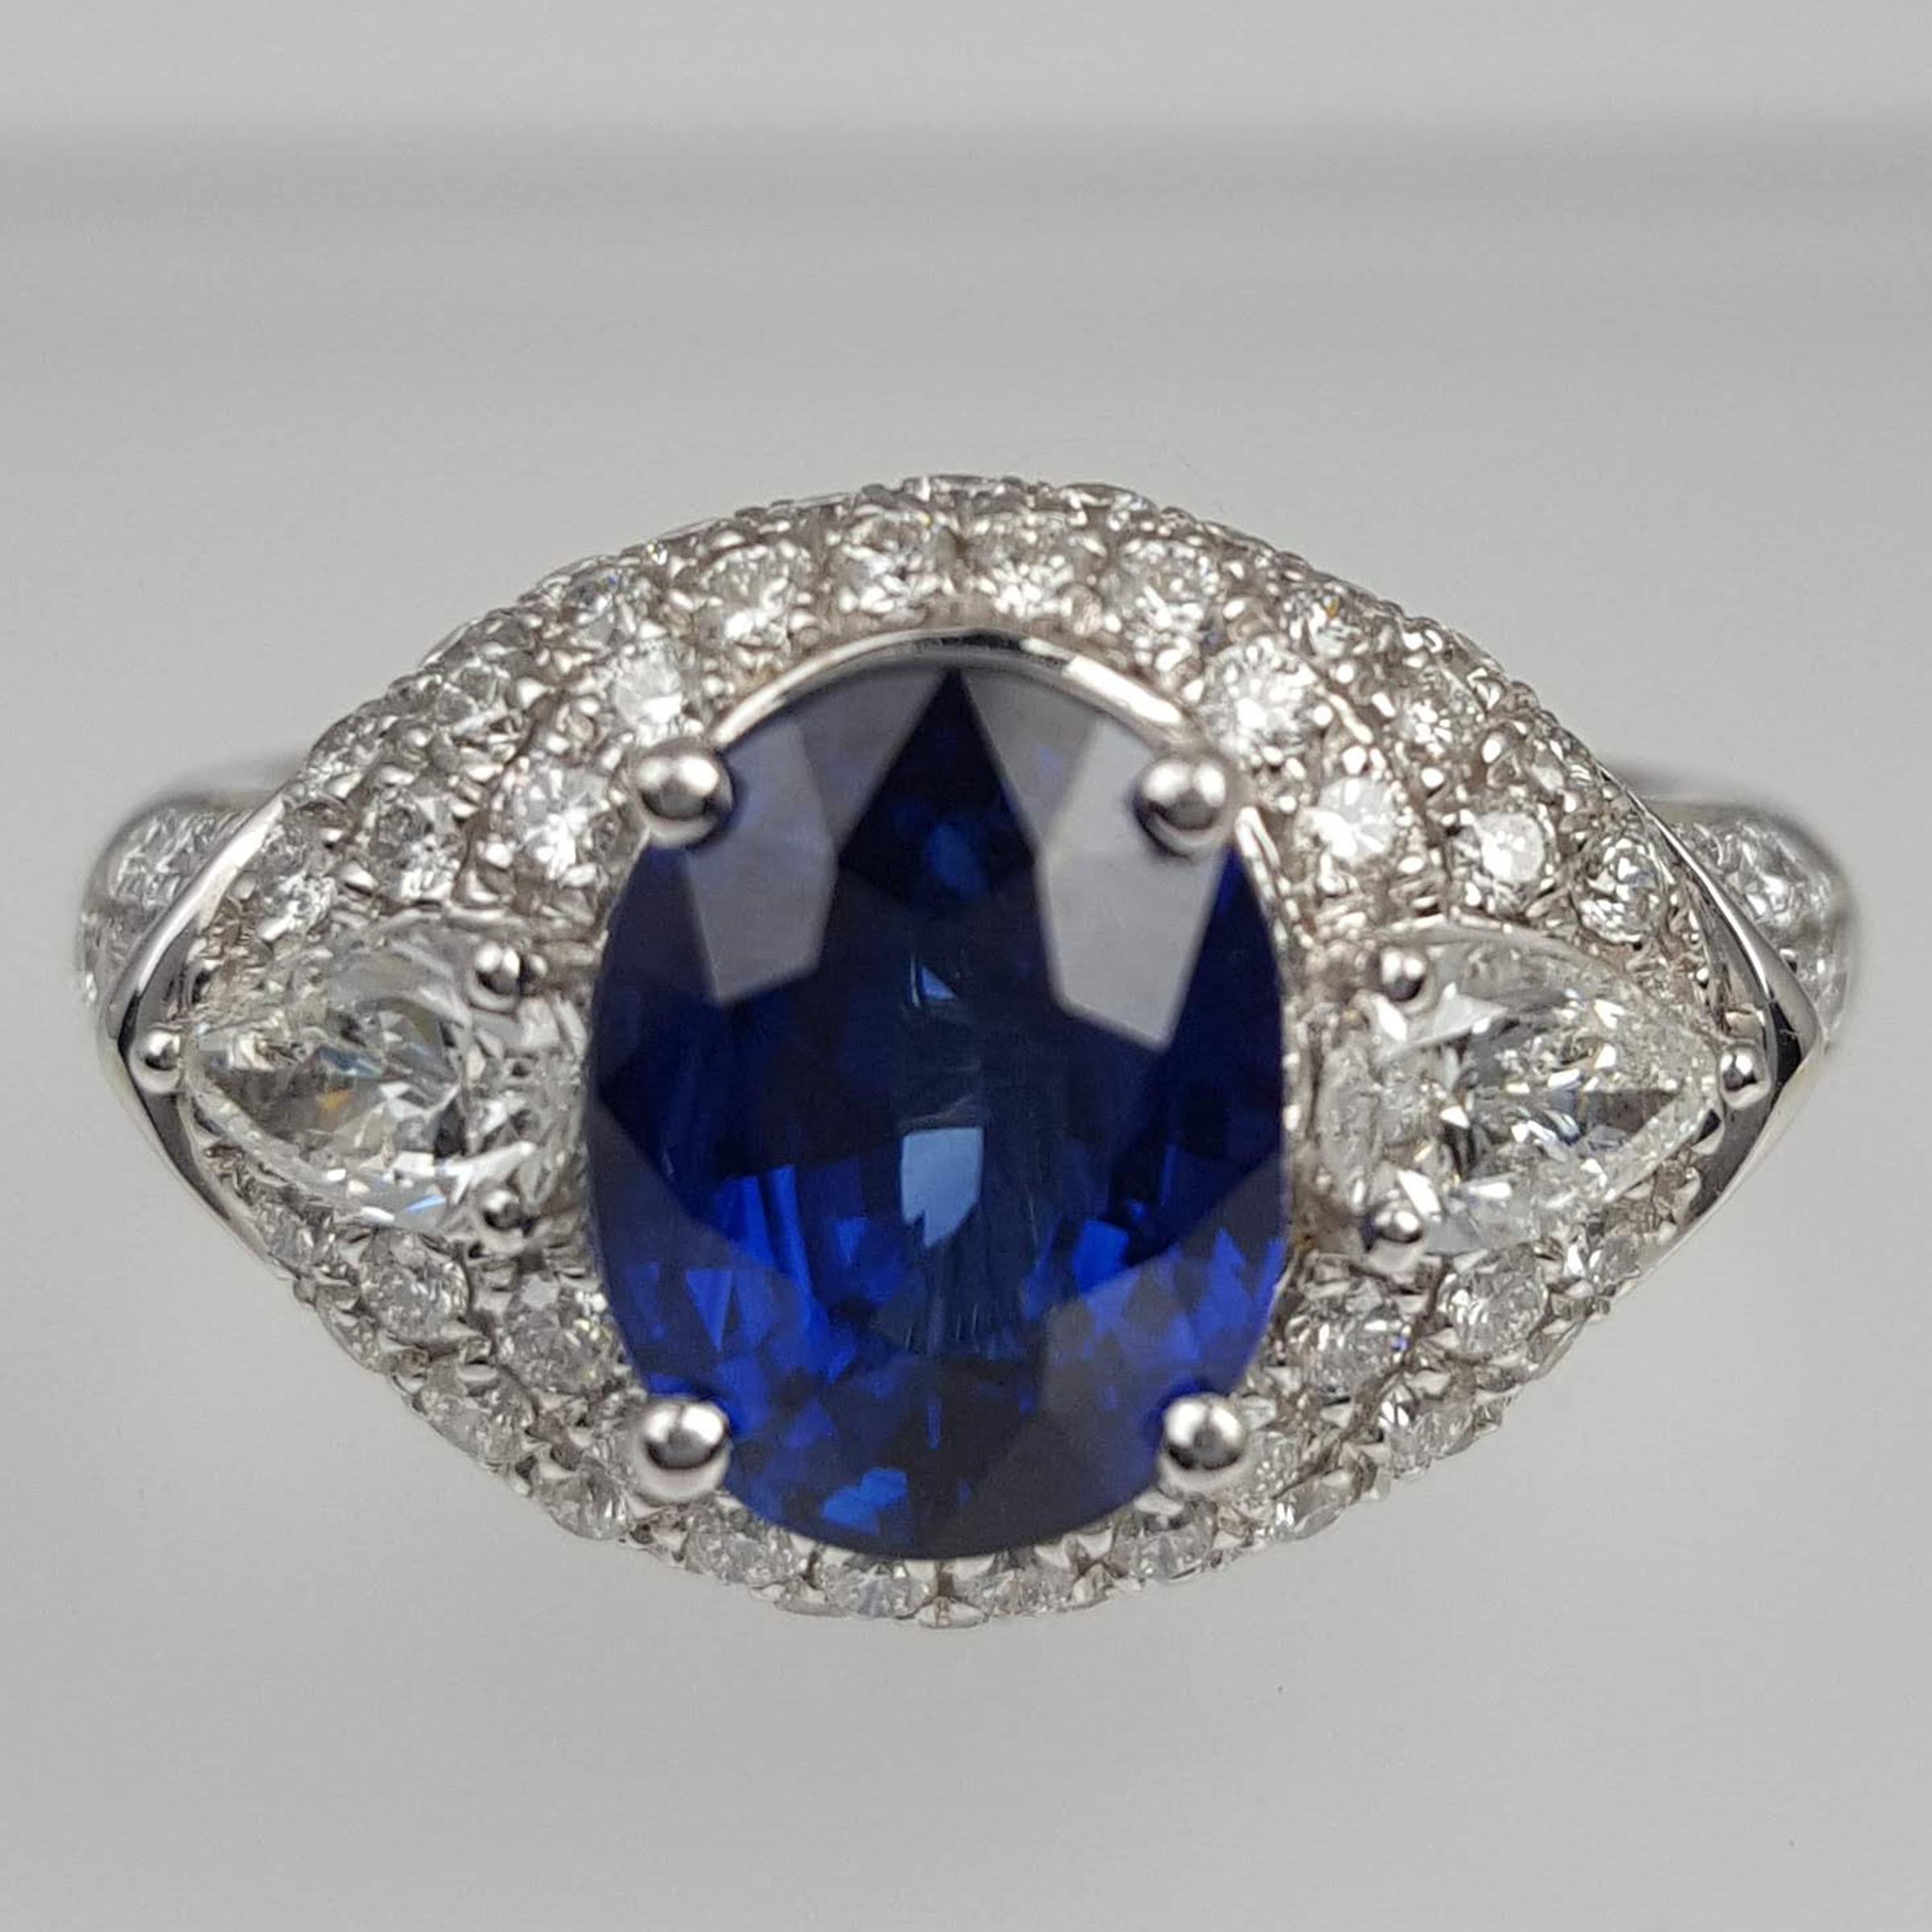 Women's GIA Certified 3.04 Carat Oval Ceylon Sapphire and Natural Diamond Ring ref780 For Sale